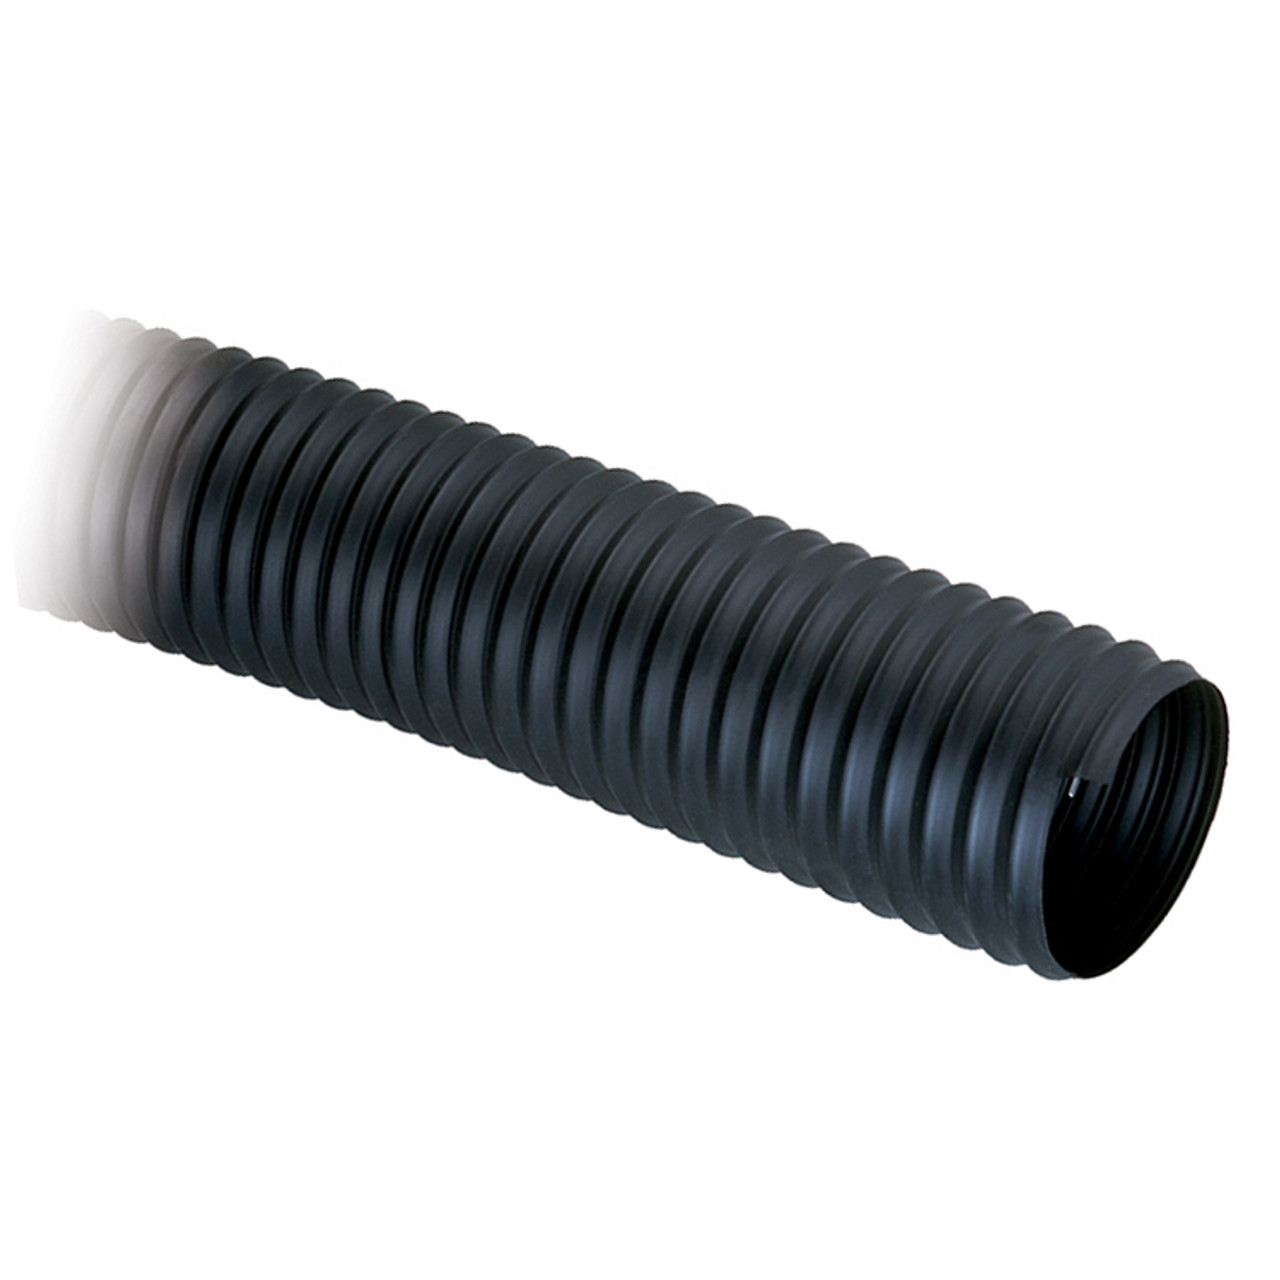 4" Thermoplastic Rubber Ducting Hose   TPR-400